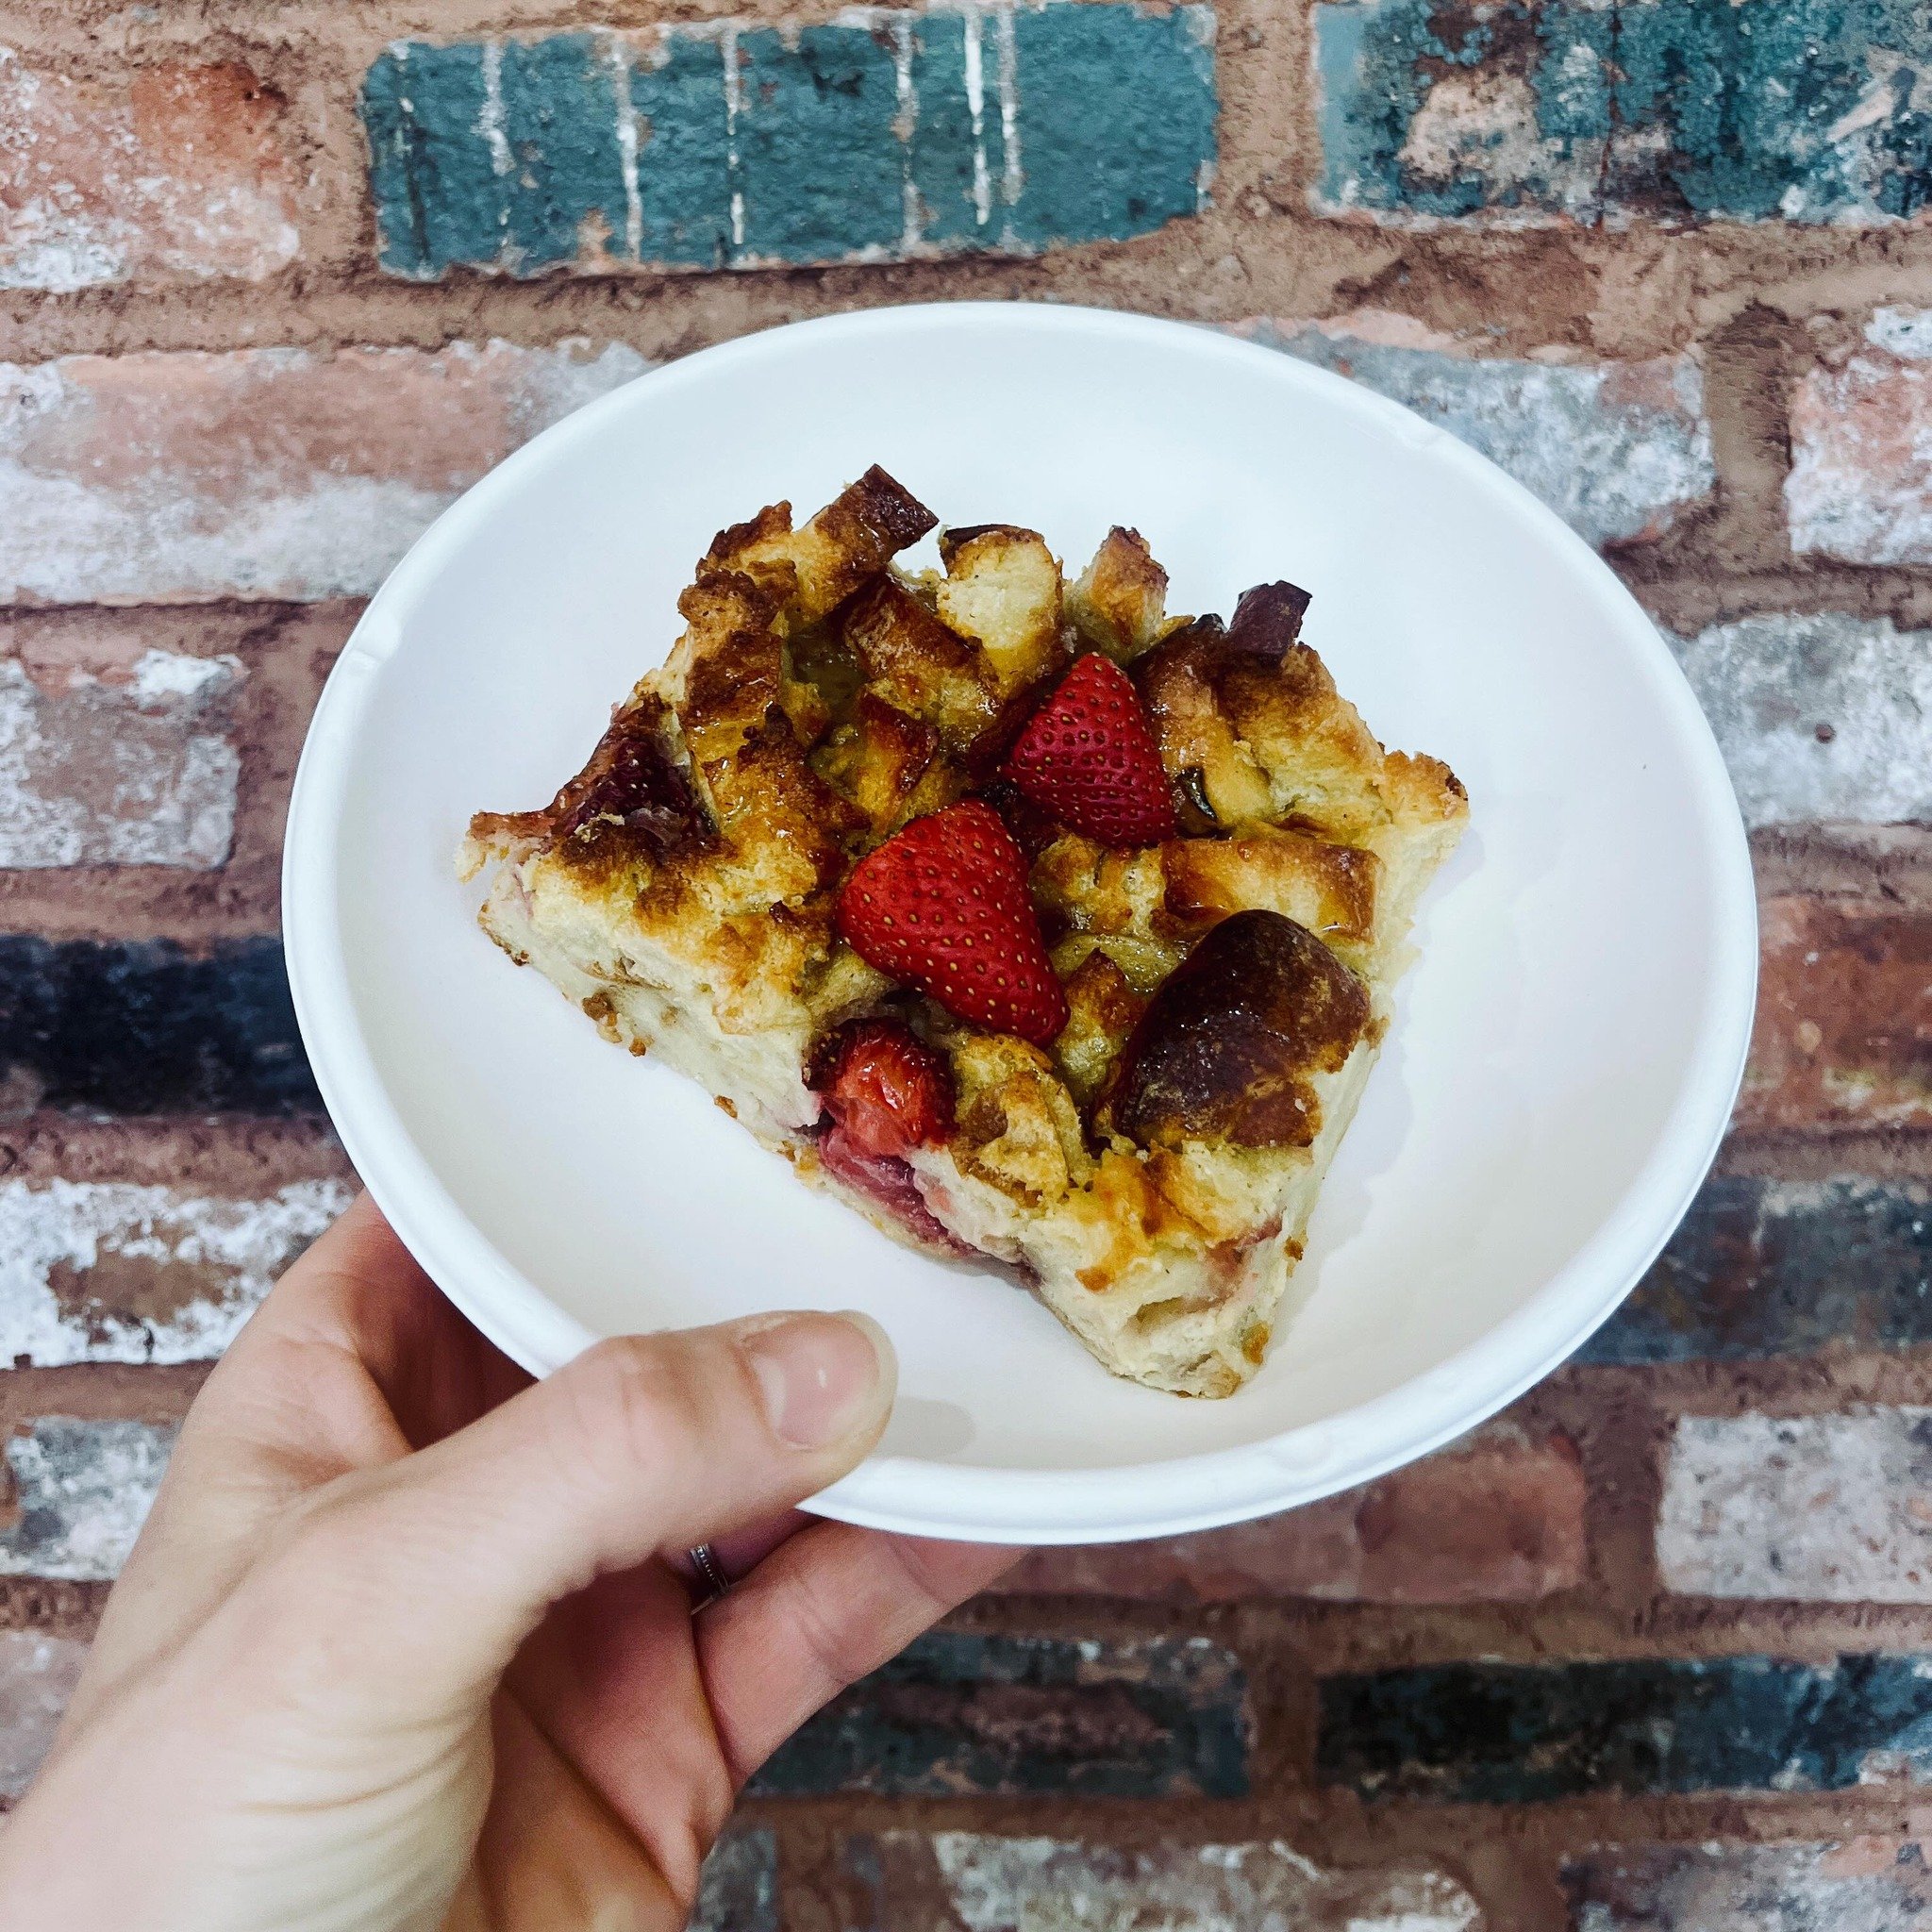 New local collab 🍓✌🏼!
Our @kelleysberryfarm STRAWBERRY bread pudding will be available this Tuesday for the very first time!

Don&rsquo;t walk, run and find it at @eastnashvillefarmersmarket (3:30 pm - 6:30 pm) and our Bakery and Cafe on Division S